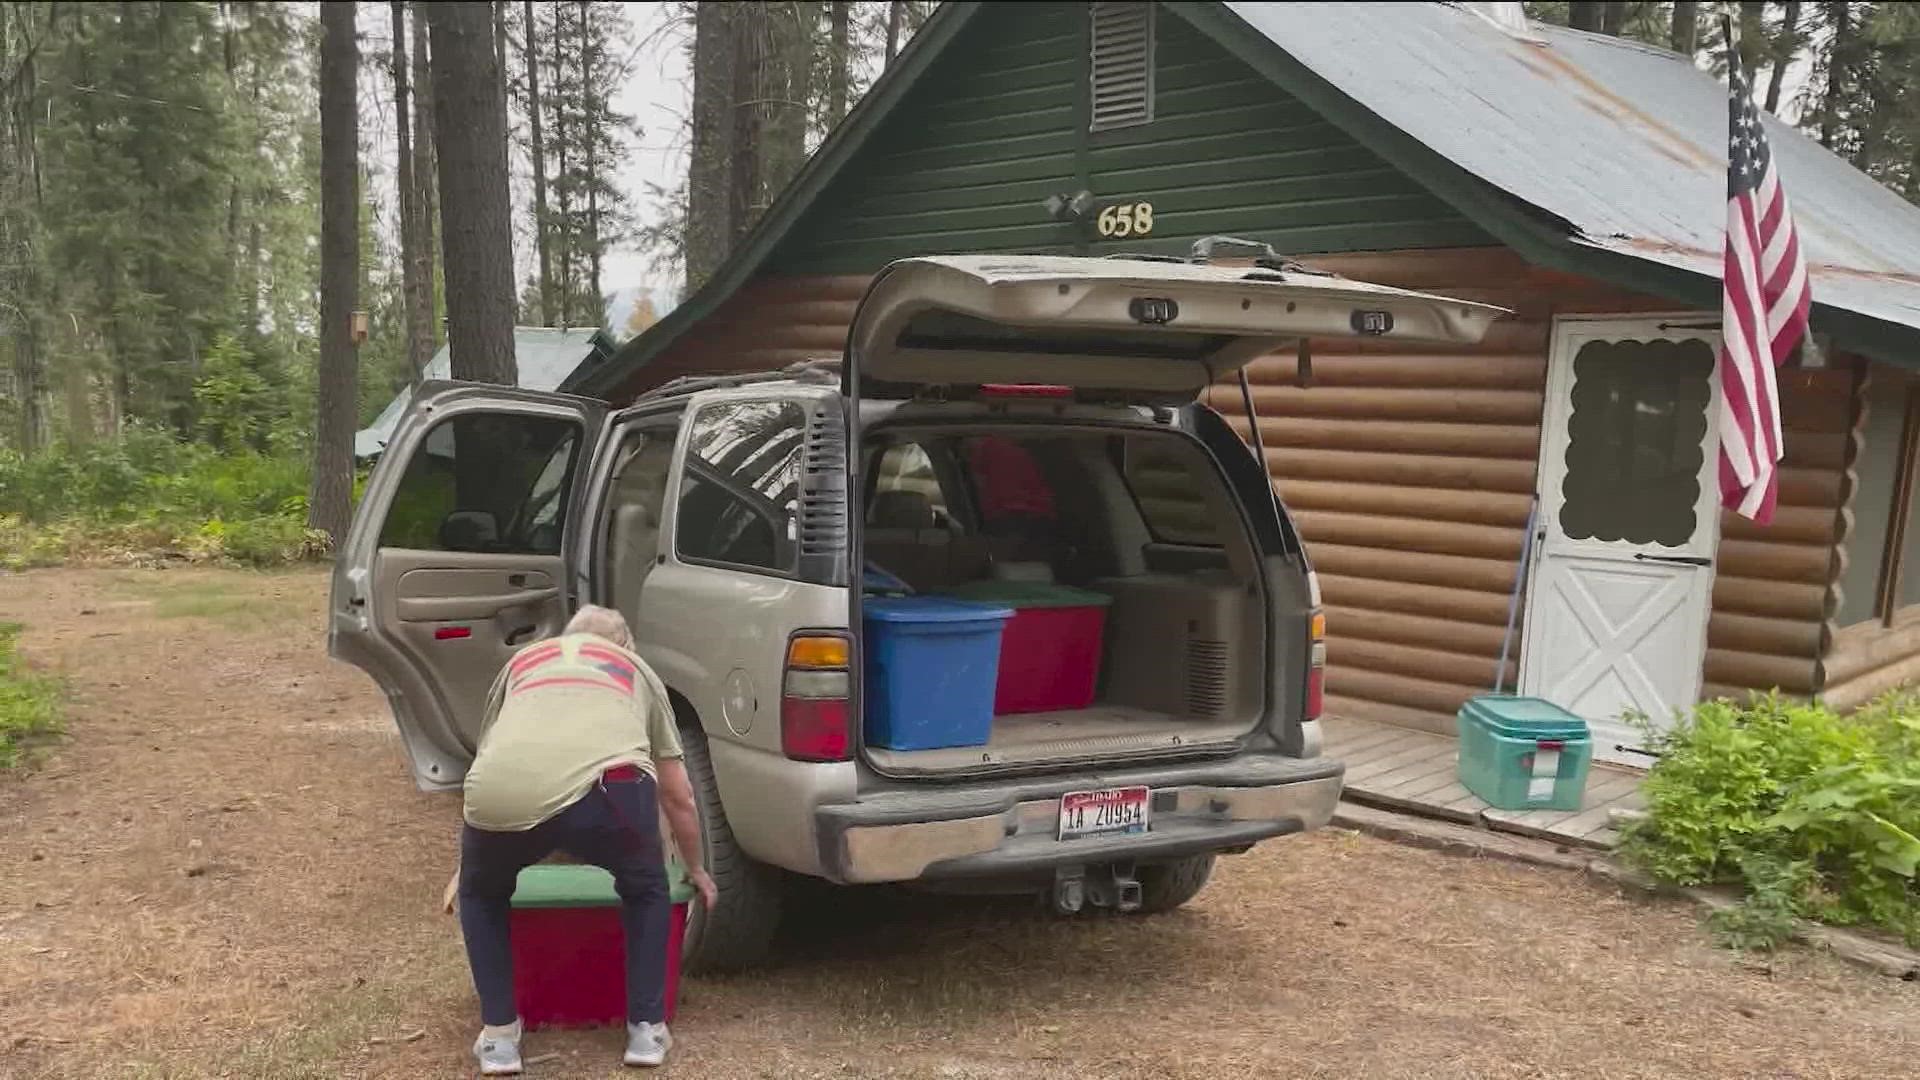 Jos Zamzow began packing up his cabin after he decided there are too many irreplaceable items and memories inside.